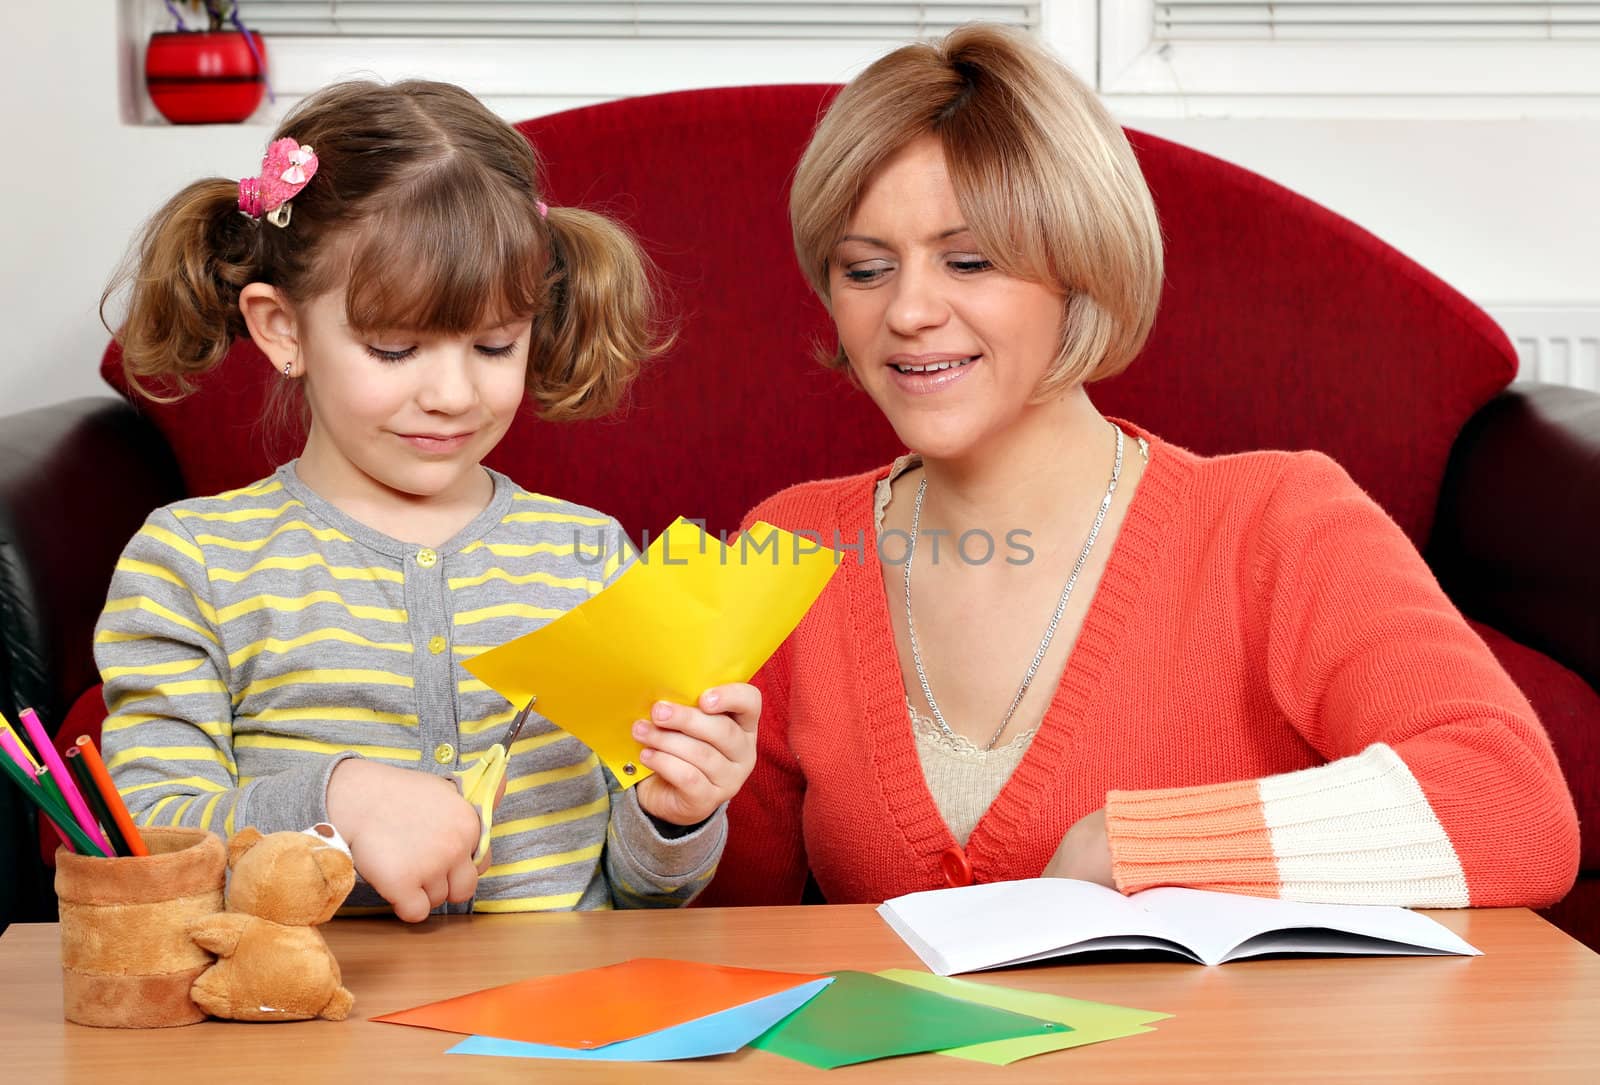 little girl cutting paper with scissors